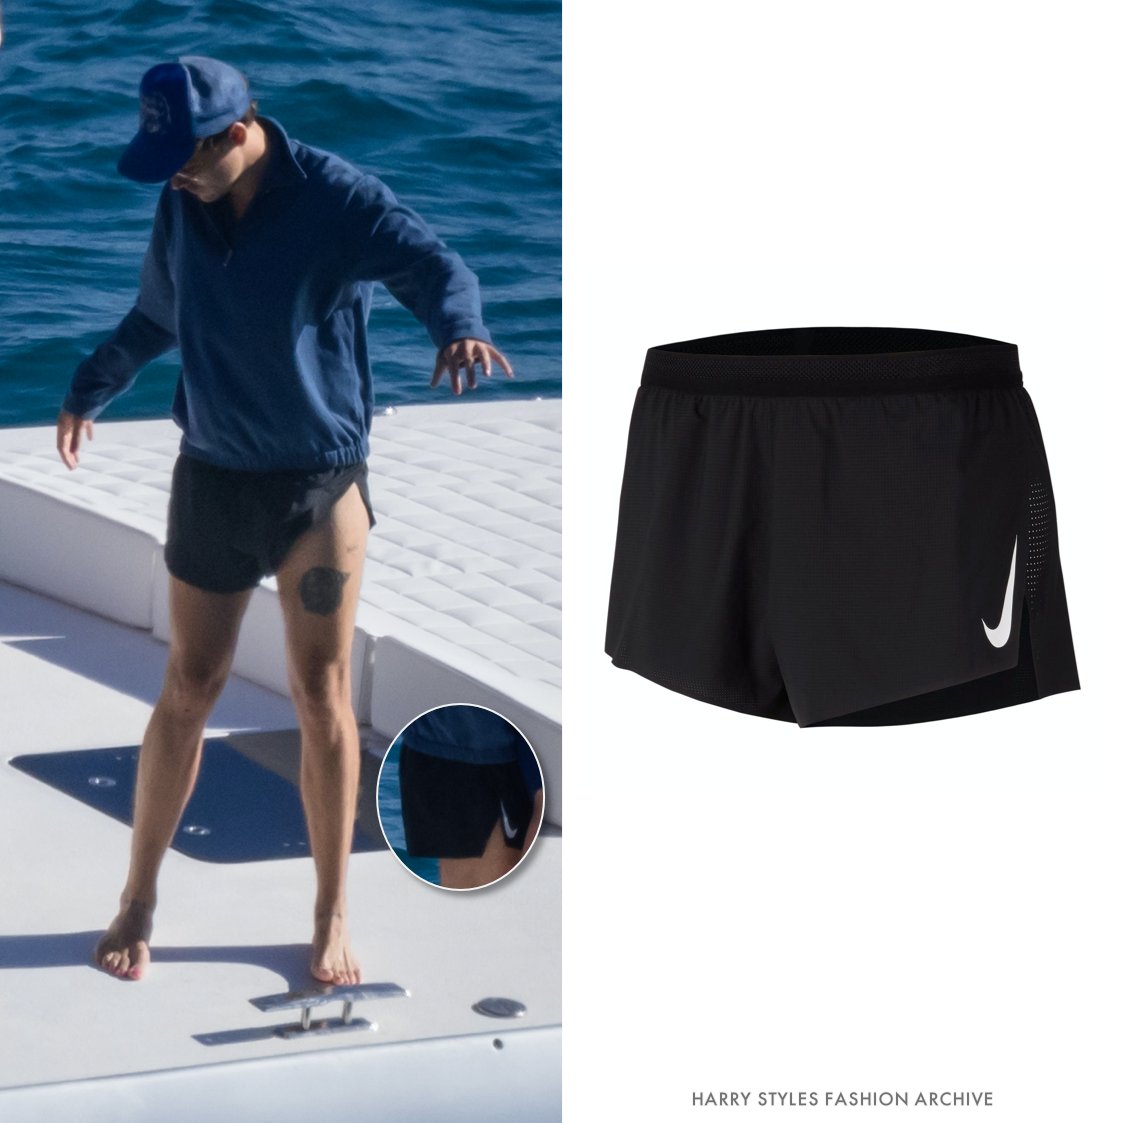 Harry Styles Fashion Archive в Twitter: „Harry wore a pair of @nike  Aeroswift 2" running shorts in Italy. https://t.co/RBy5sOt8Nt  https://t.co/0EJJGj8s9X“ / Twitter